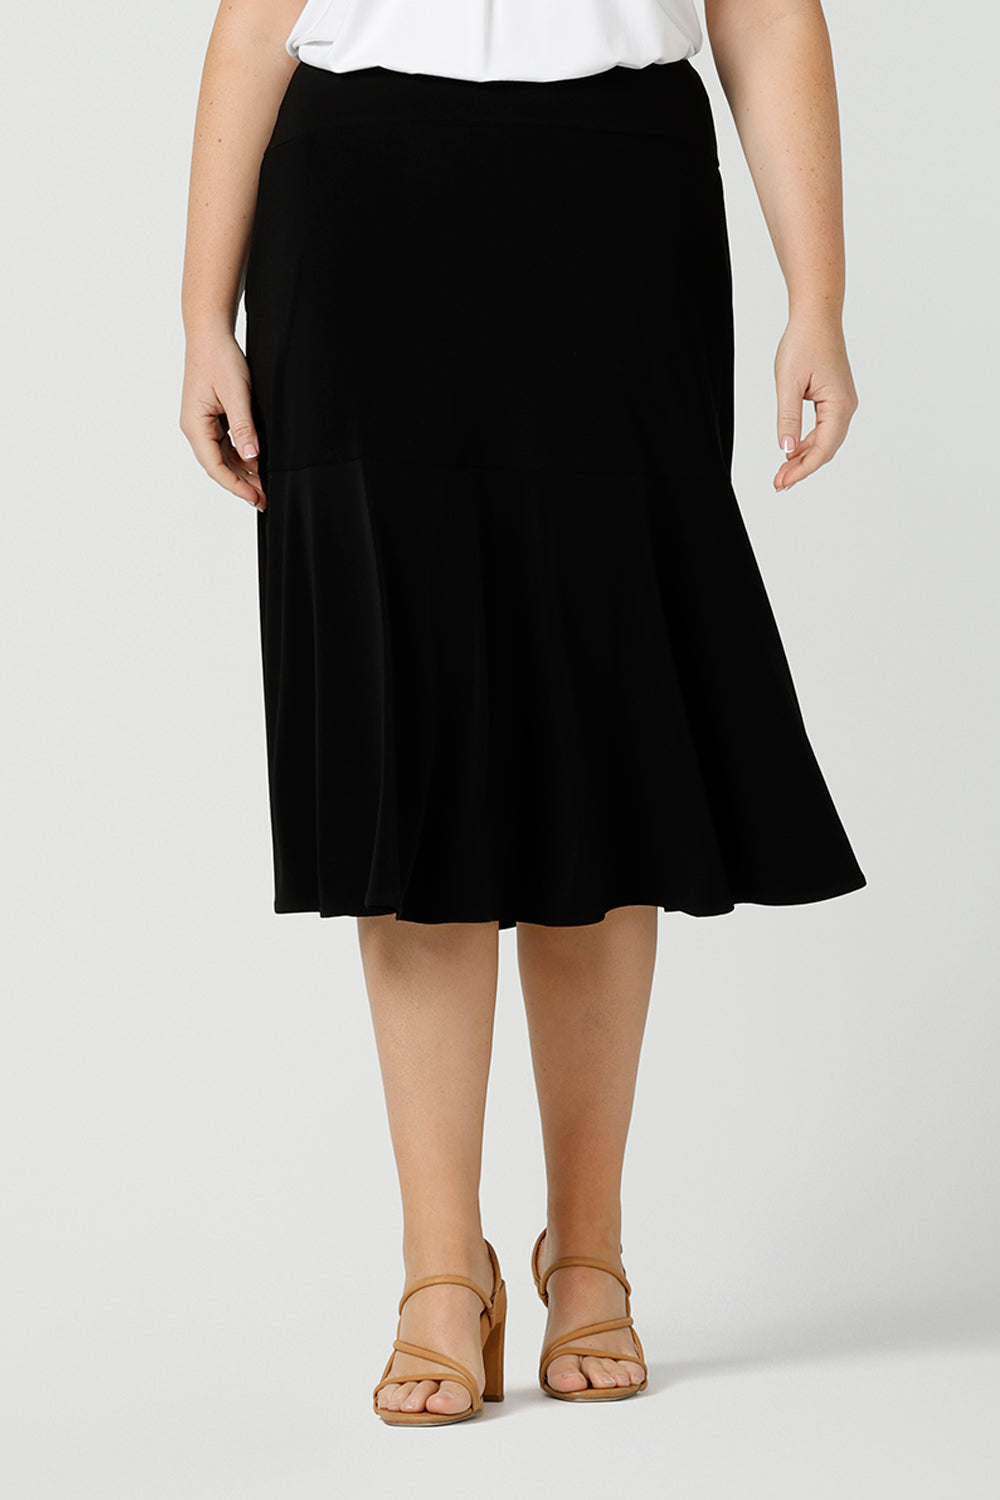 A good workwear skirt for women, this knee-length, pull-on black skirt has pockets, a ruffle hemline and comfort waistband. A great addition to your capsule wardrobe, this black skirt is made by Australian made women's clothing brand, Leina & Fleur. Shop petite to plus size skirts in their online boutique in Australia. 